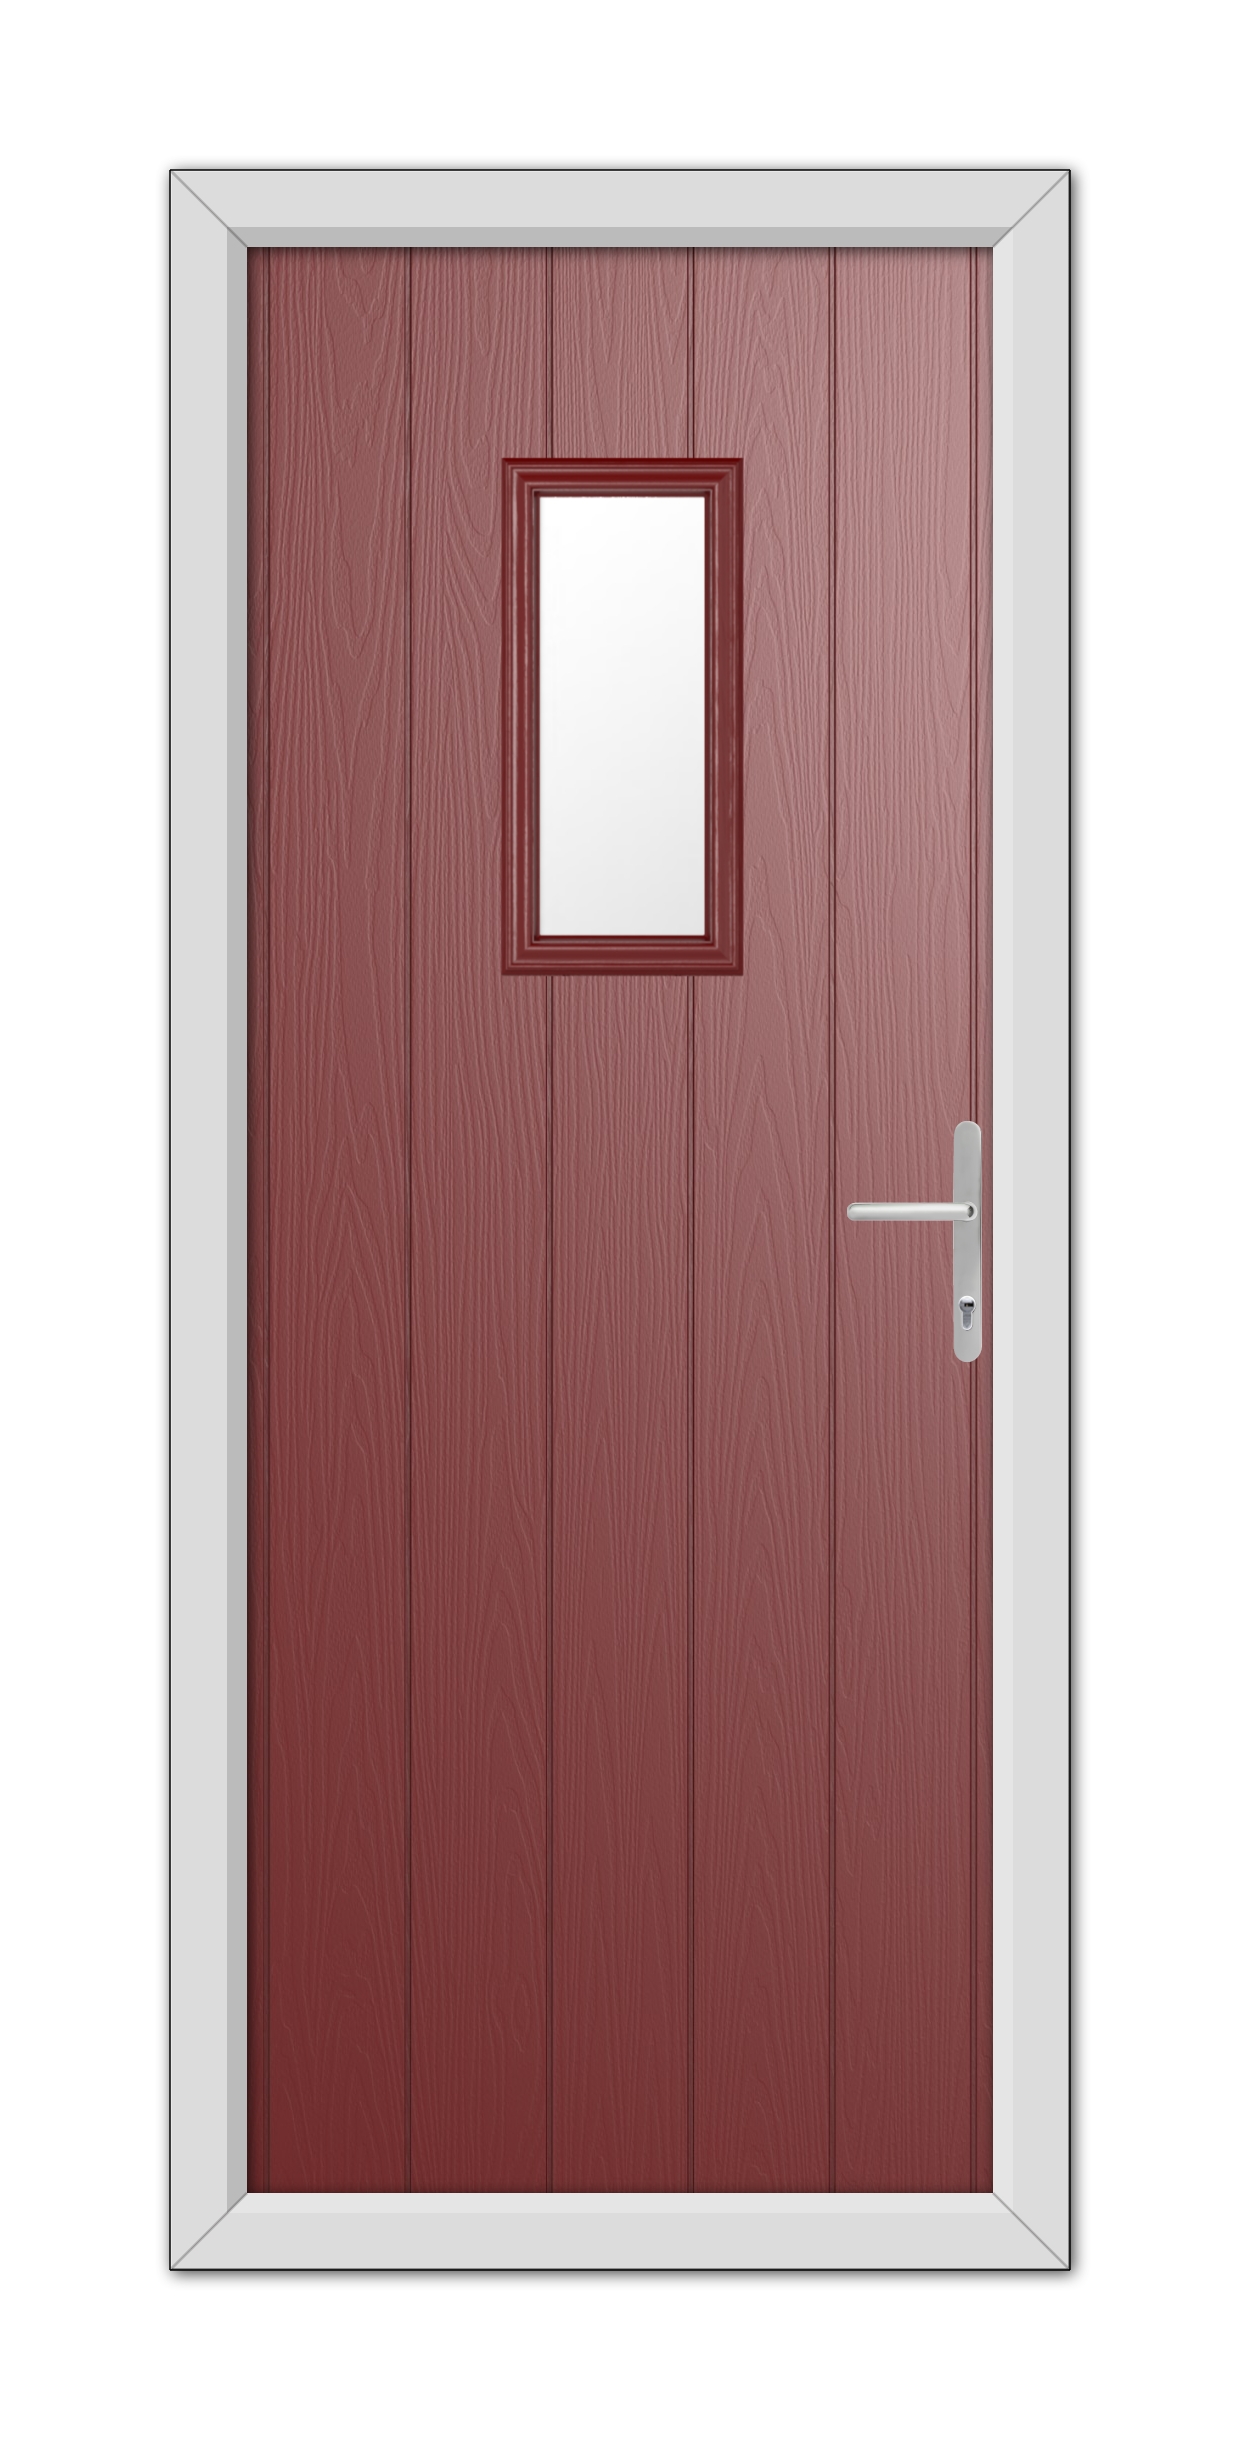 A modern Red Somerset Composite Door 48mm Timber Core with a white frame, featuring a square window at the center and a silver handle on the right.